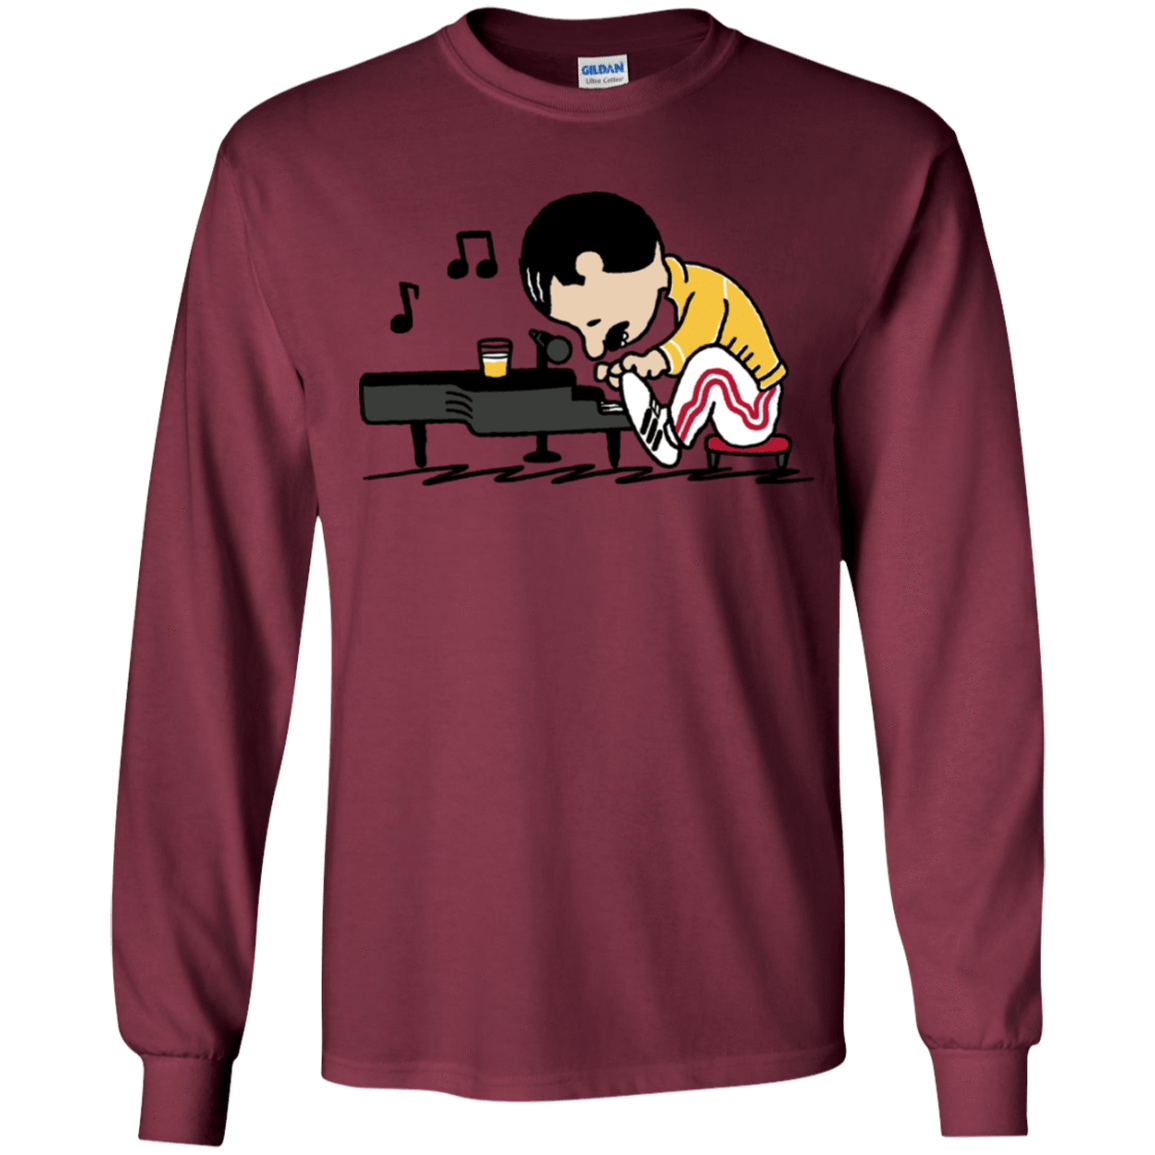 T-Shirts Maroon / YS Queenuts Youth Long Sleeve T-Shirt